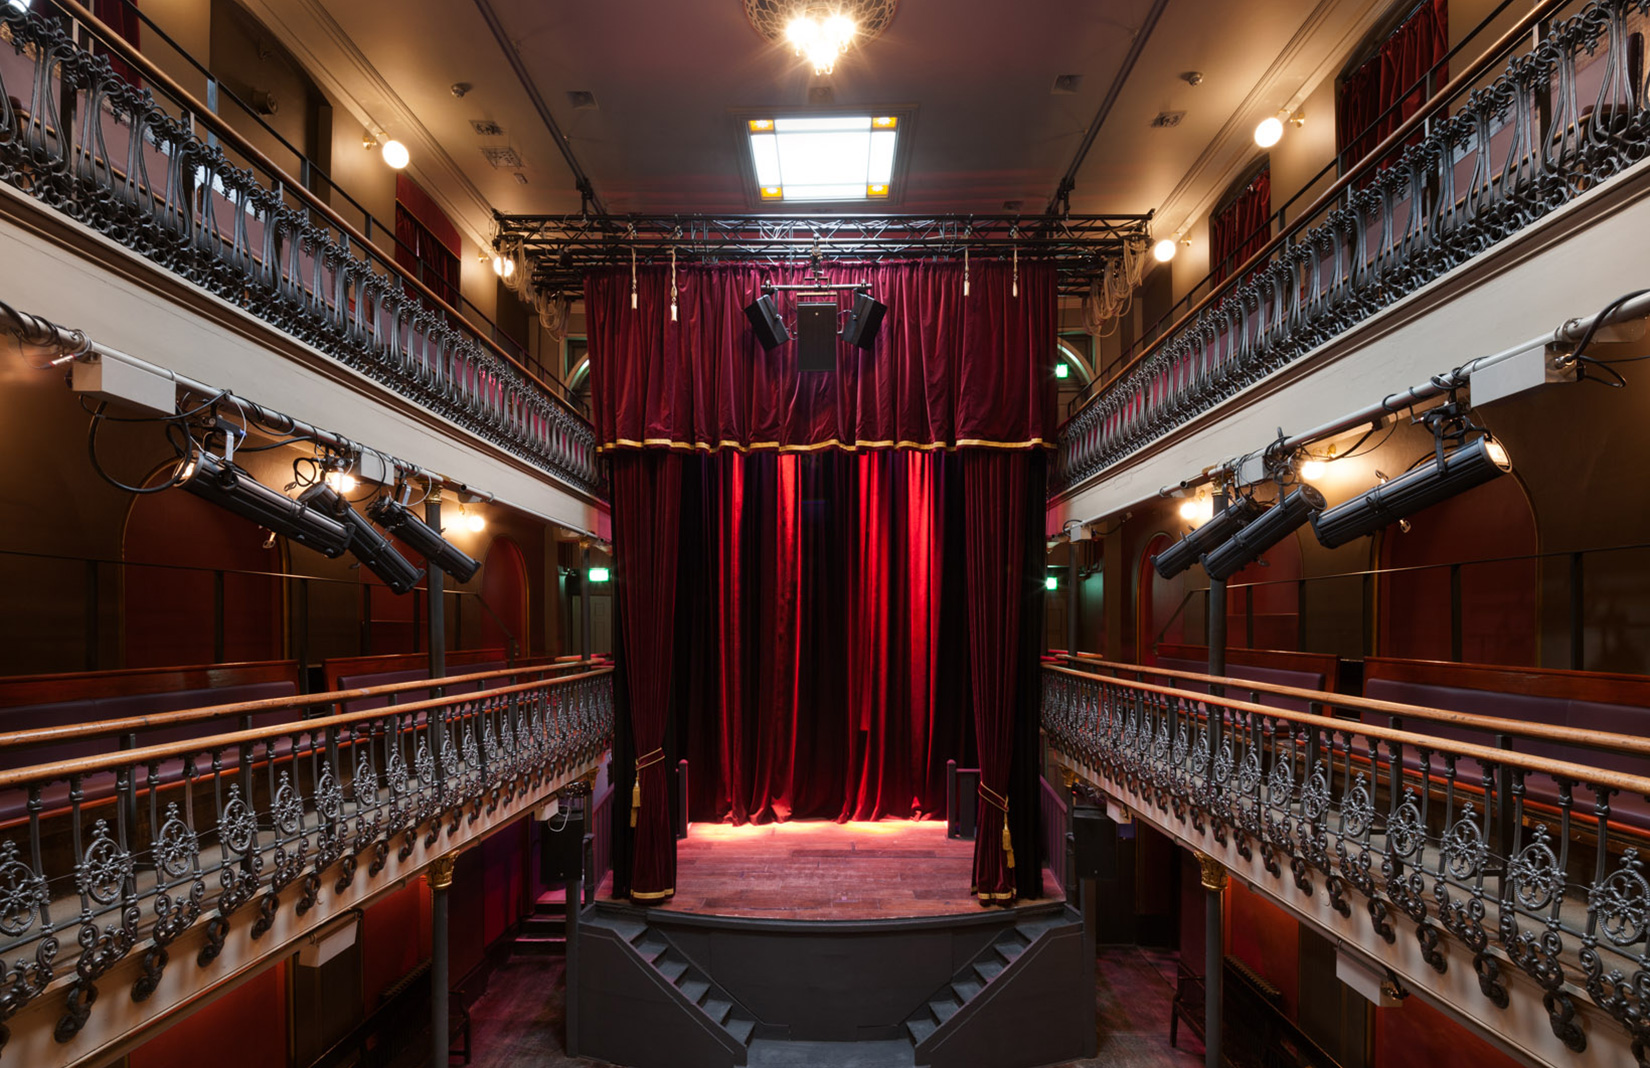 The restored music hall at Hoxton Hall